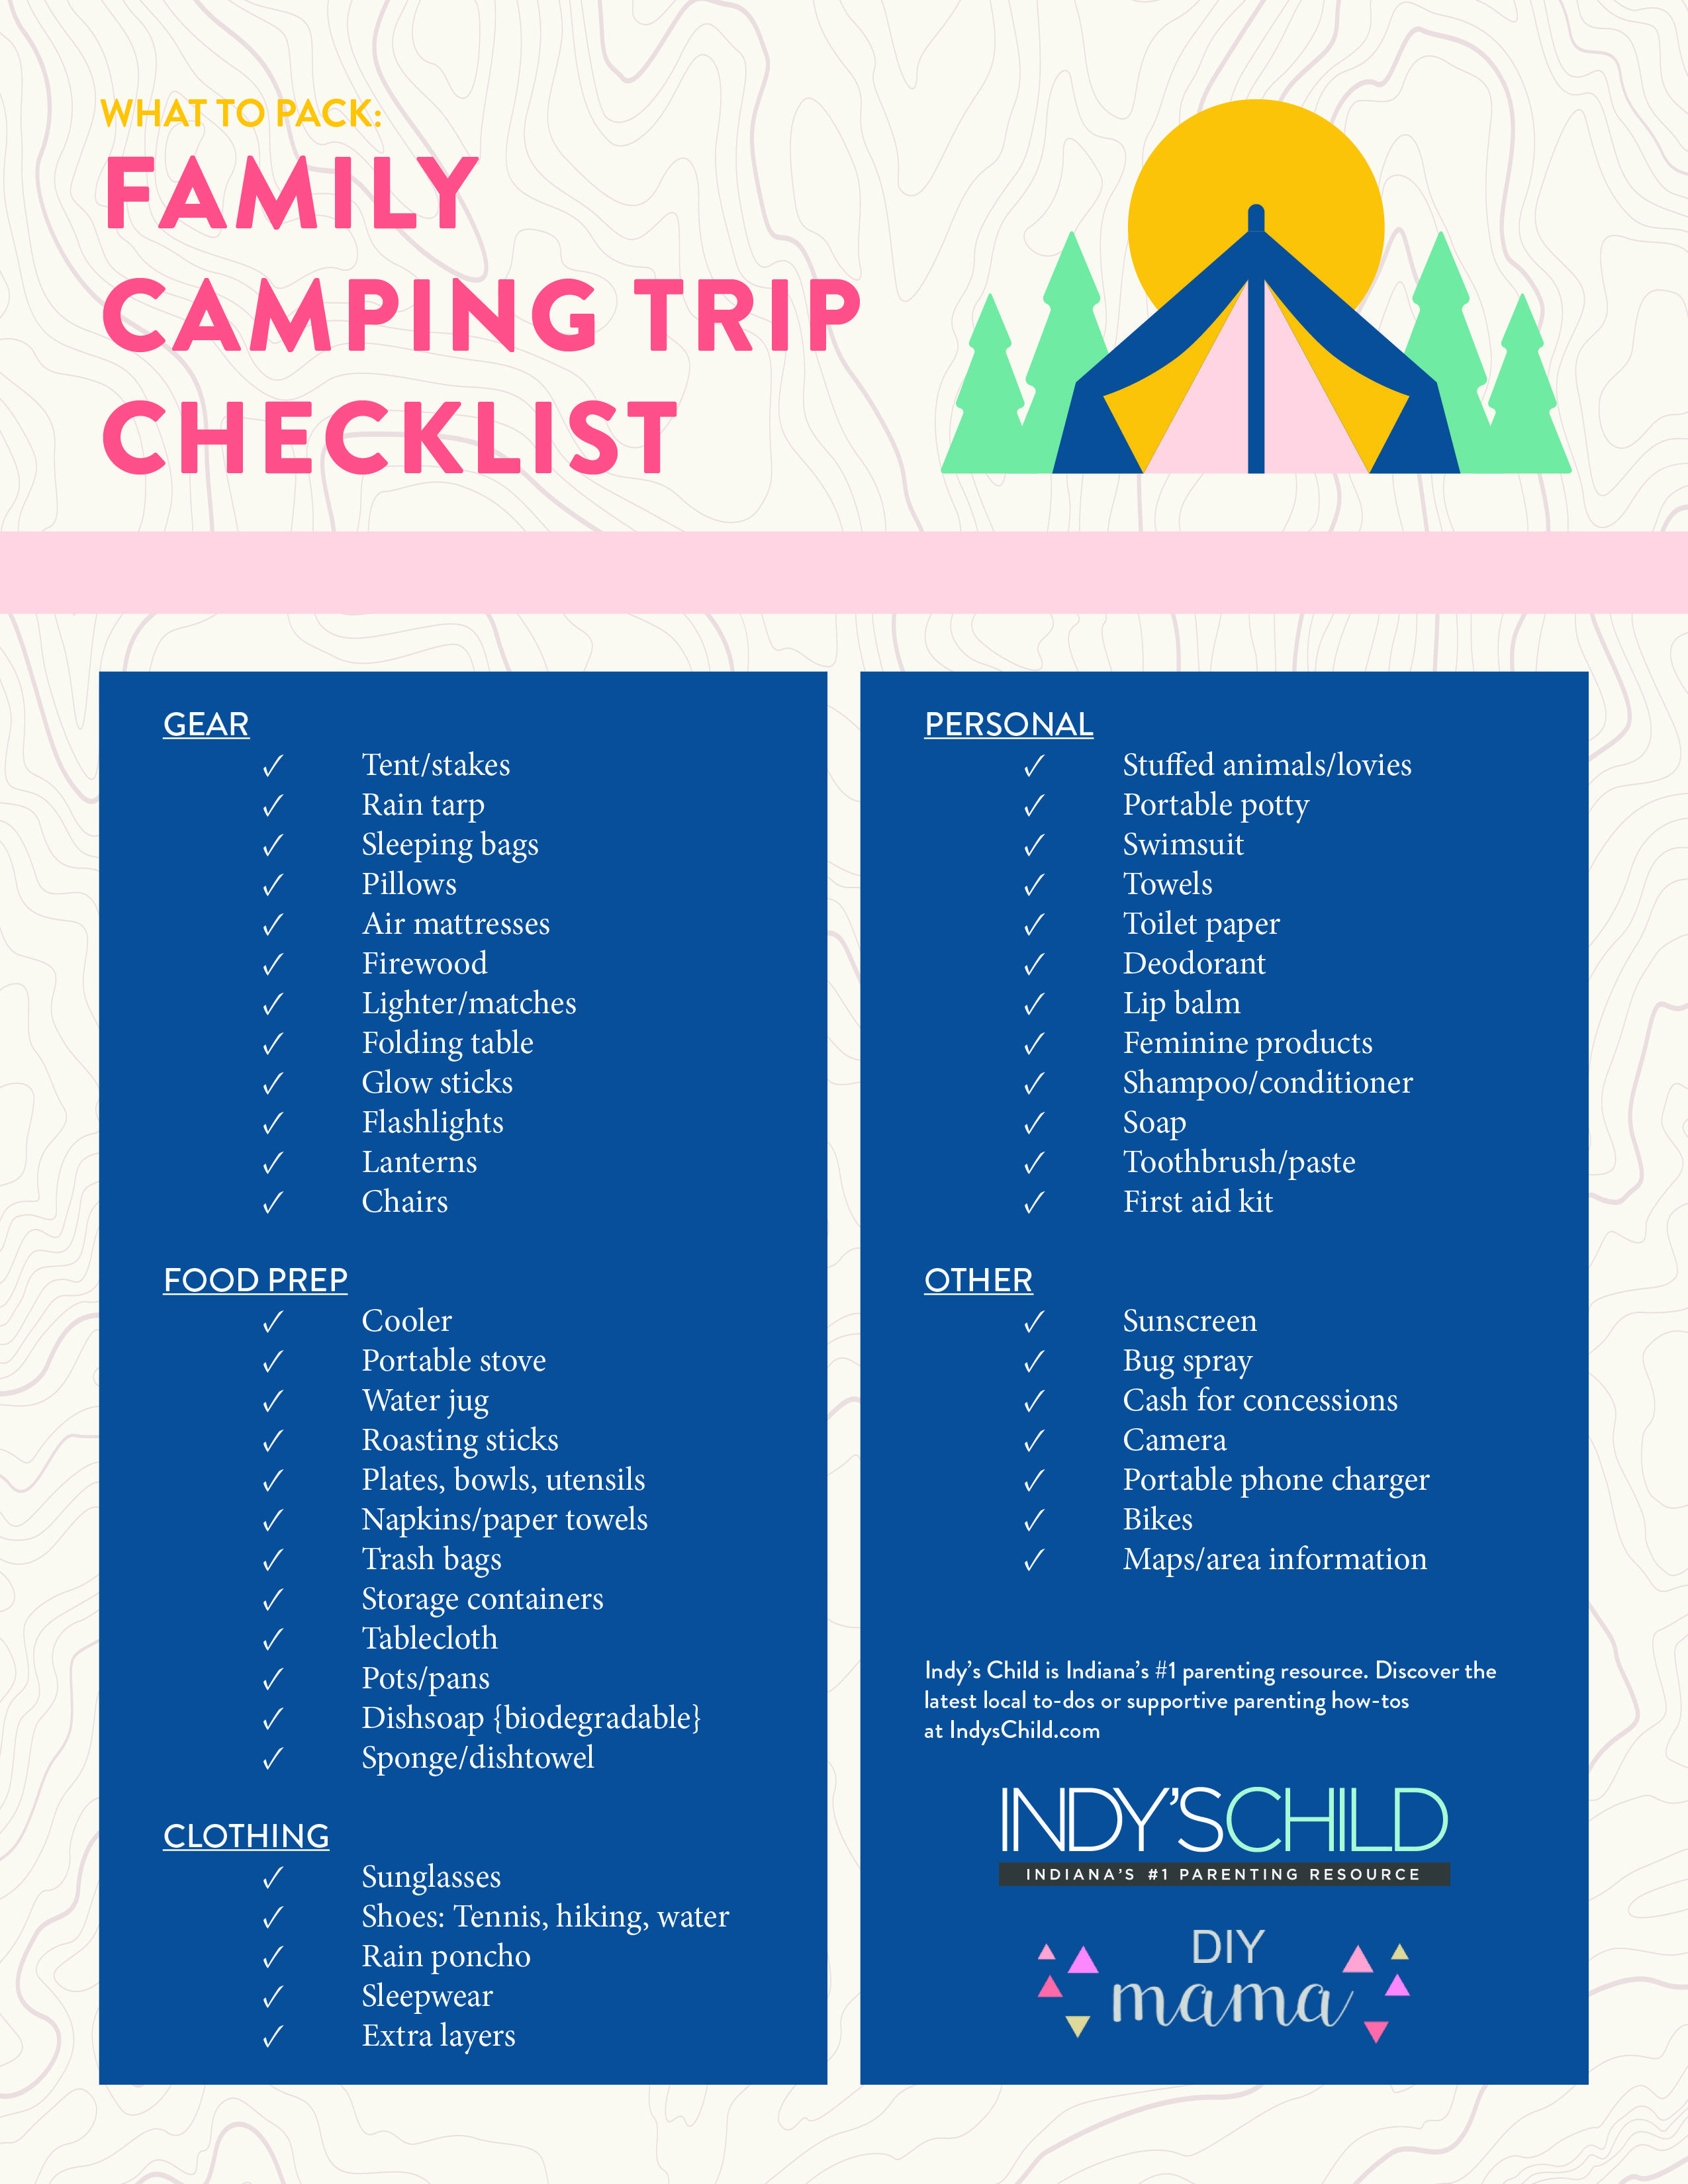 What to pack family camping checklist _ Indy's Child Magazine